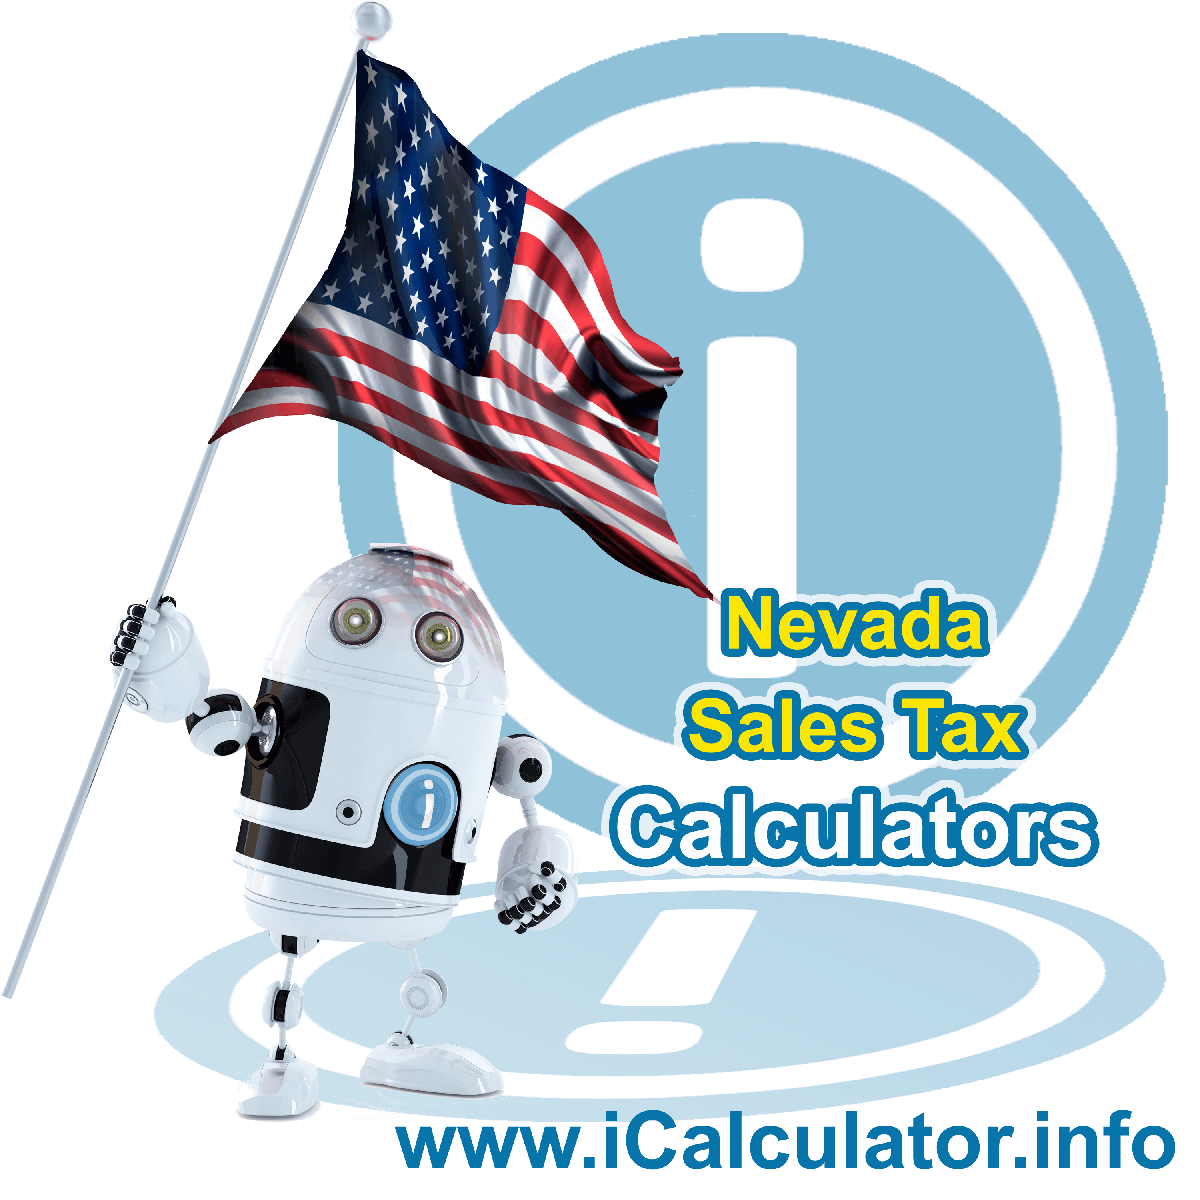 Nye County Sales Rates: This image illustrates a calculator robot calculating Nye County sales tax manually using the Nye County Sales Tax Formula. You can use this information to calculate Nye County Sales Tax manually or use the Nye County Sales Tax Calculator to calculate sales tax online.